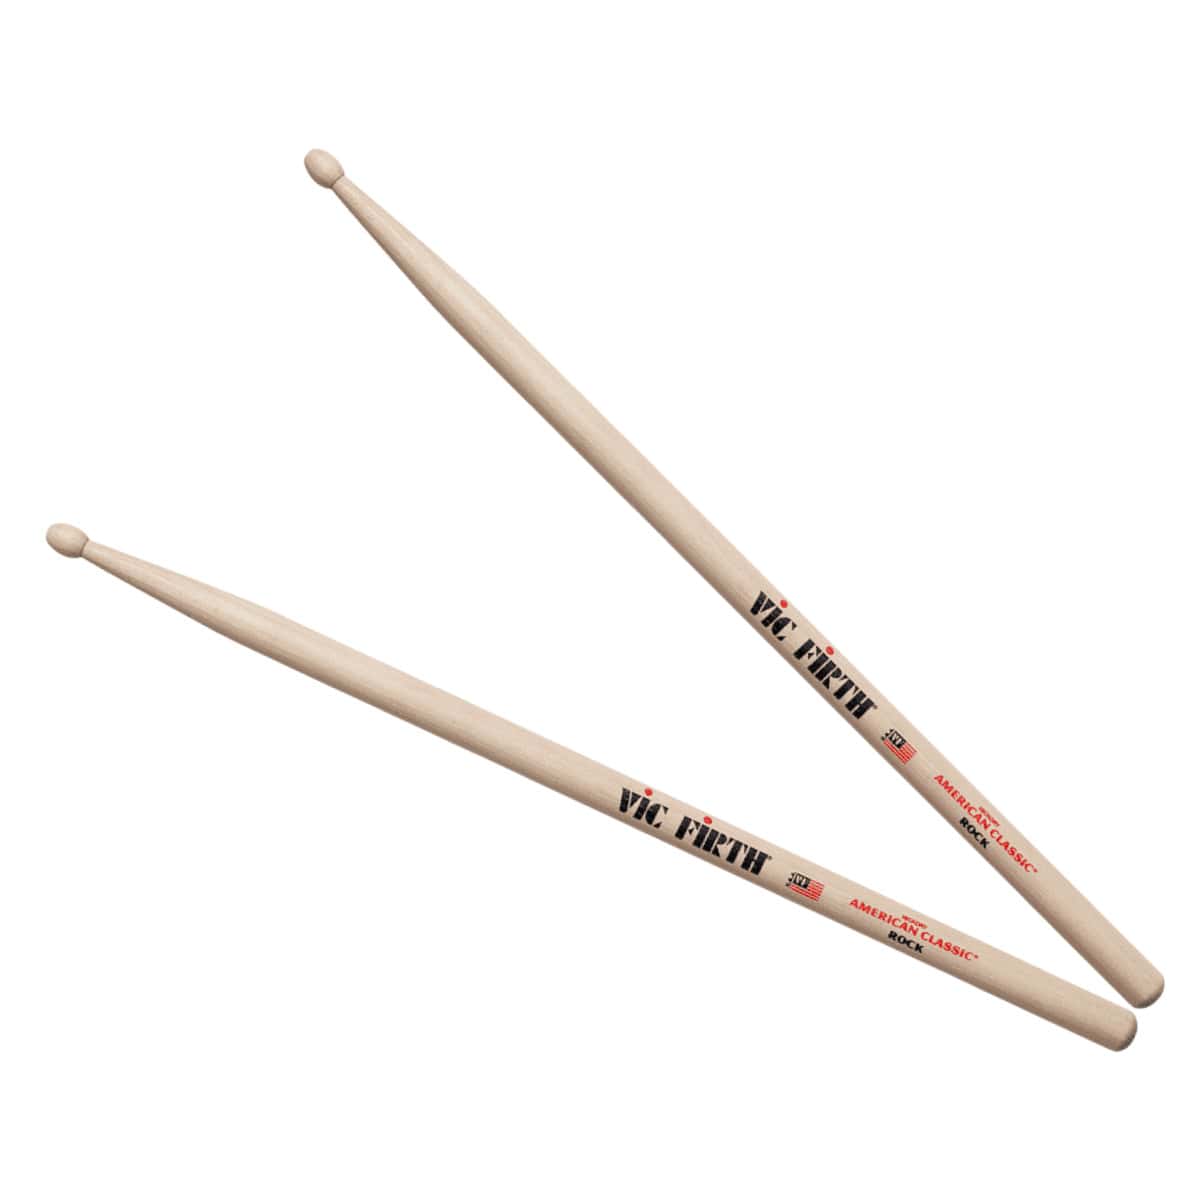 VIC FIRTH AMERICAN CLASSIC HICKORY ROCK STCKE